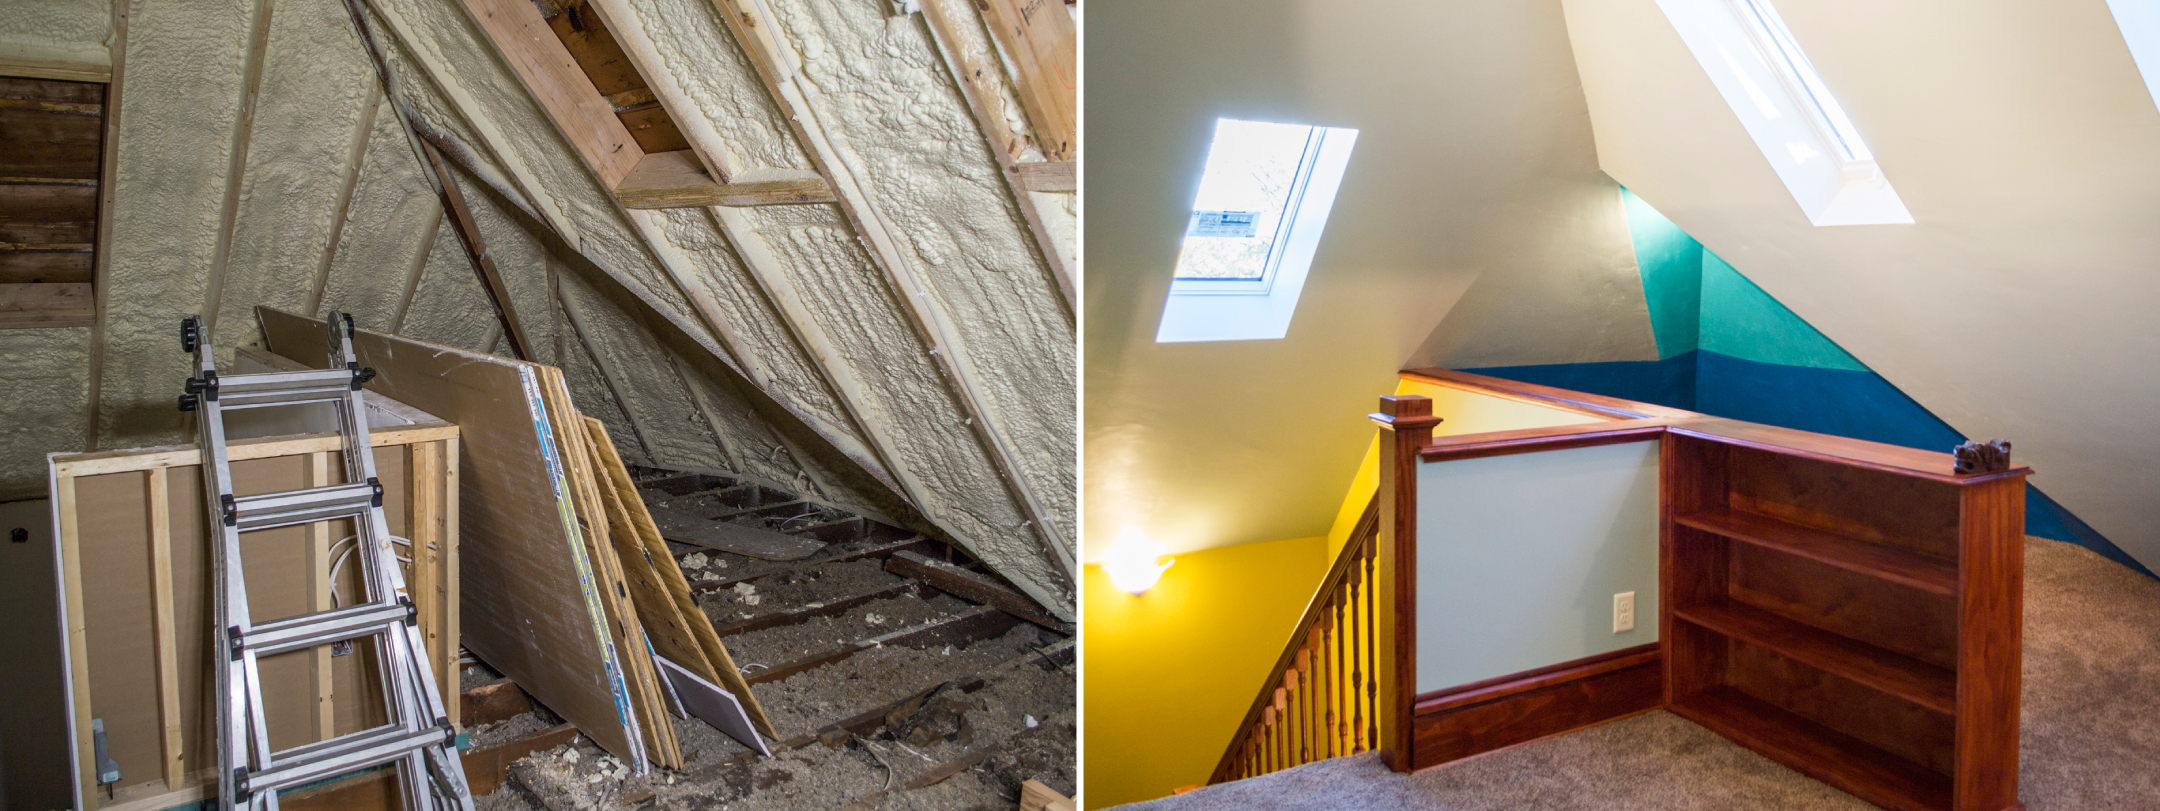 Before and after of a Victorian attic space